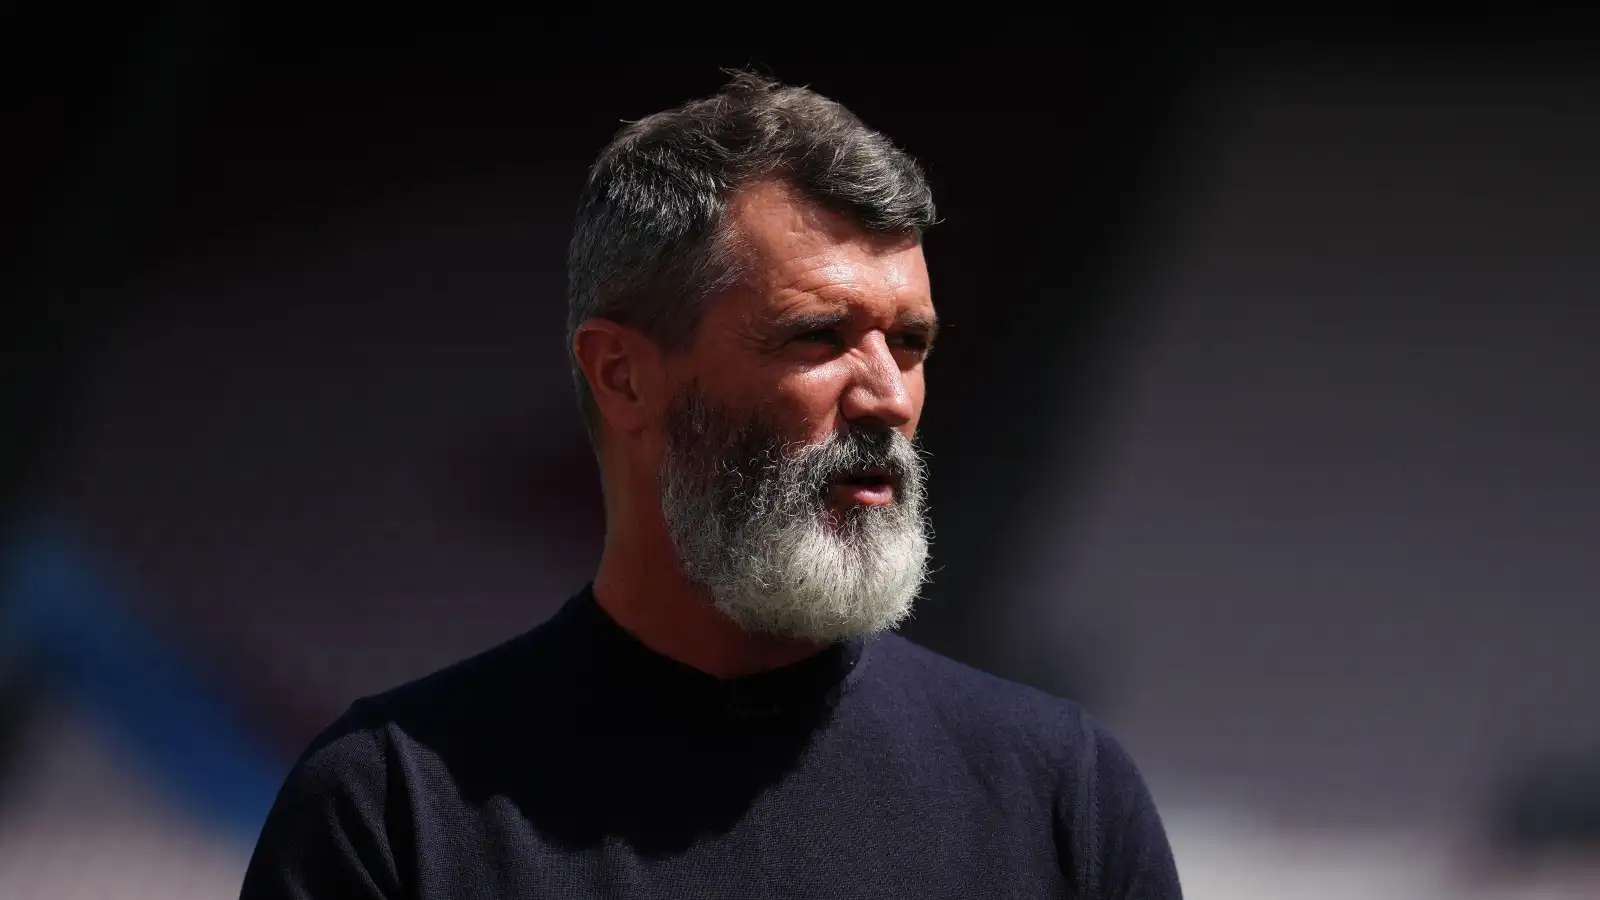 Watch: Roy Keane hilariously takes down De Gea after FA Cup blunder